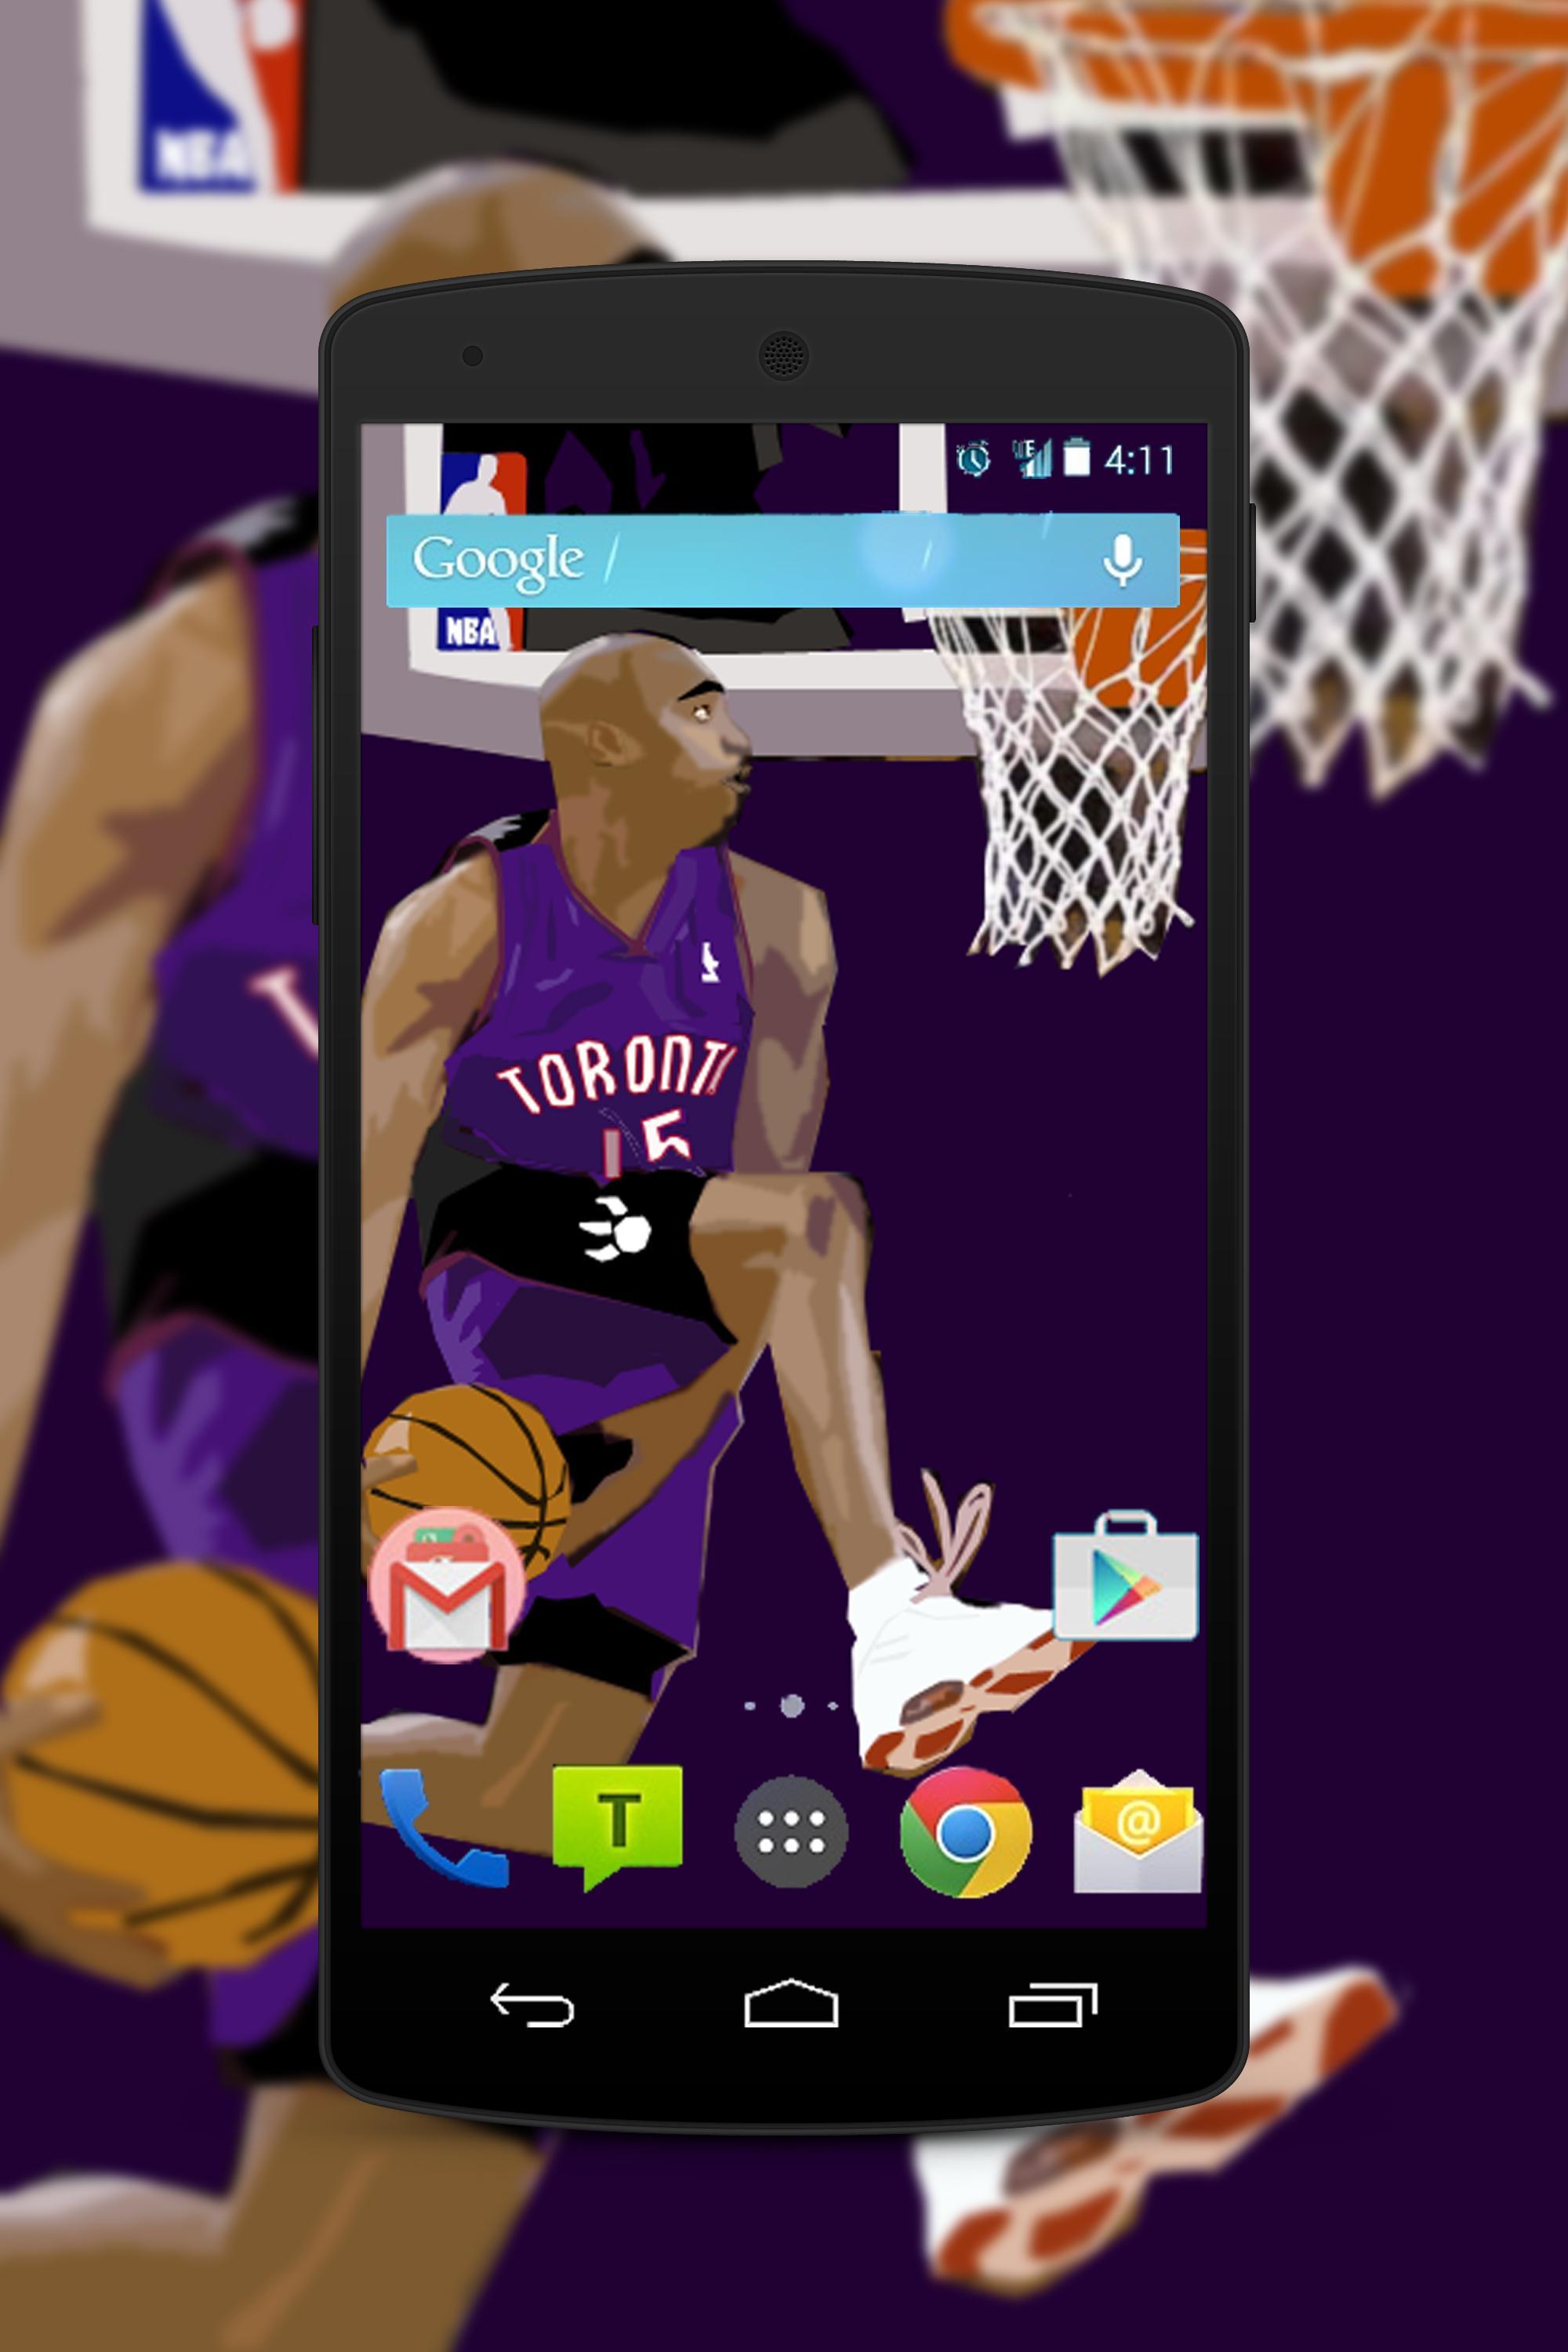 Vince Carter Wallpaper Fans Hd For Android Apk Download Images, Photos, Reviews